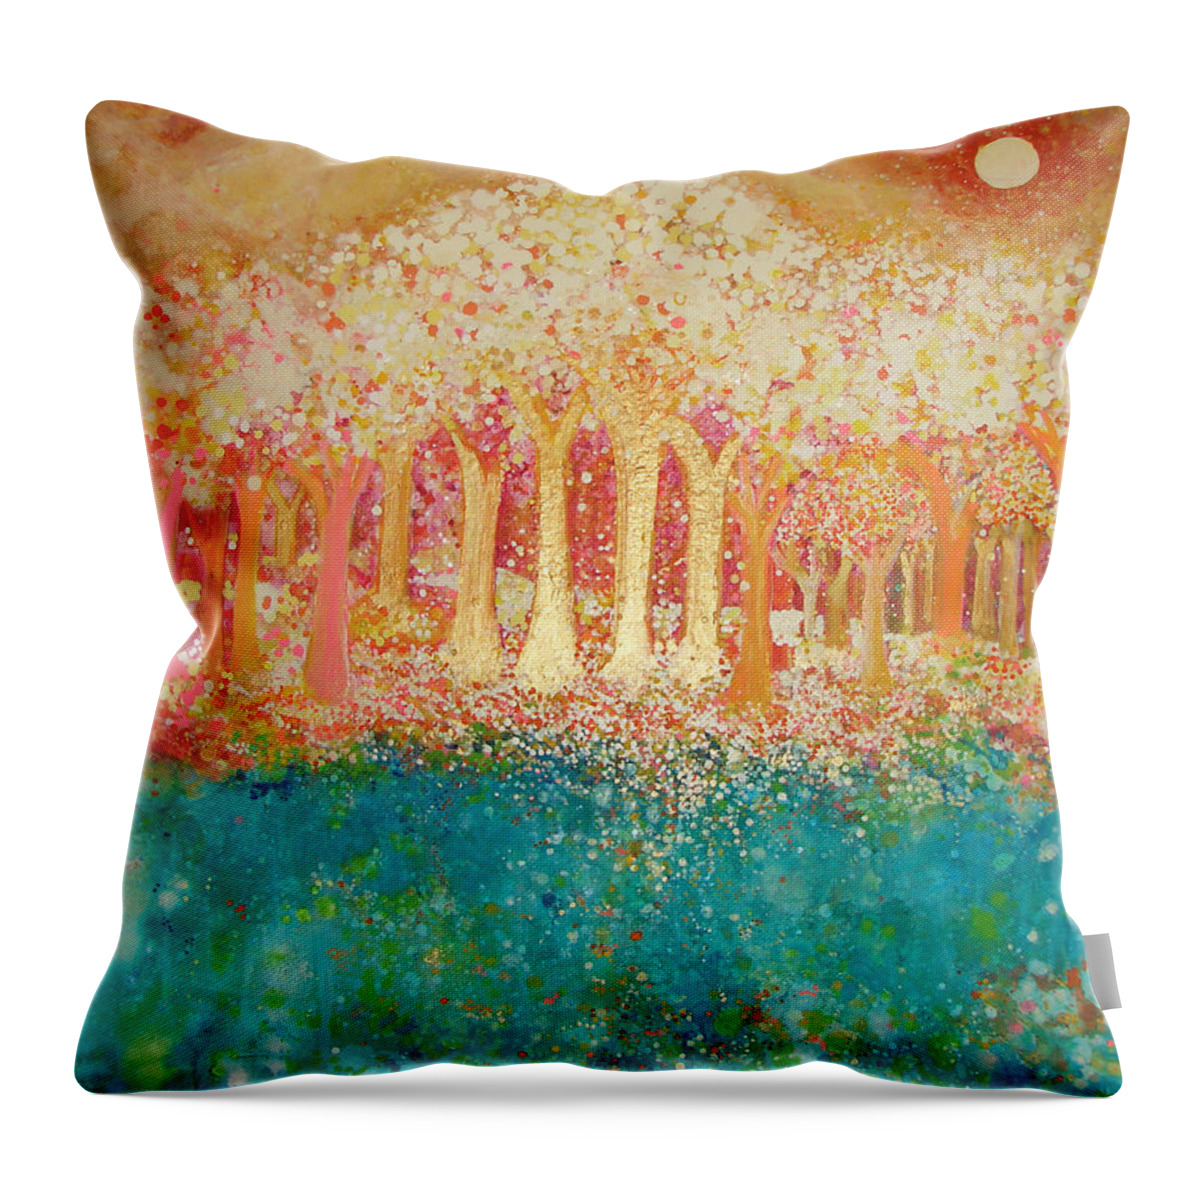 Cherry Blossoms Throw Pillow featuring the painting Cherry Blossoms by Ashleigh Dyan Bayer